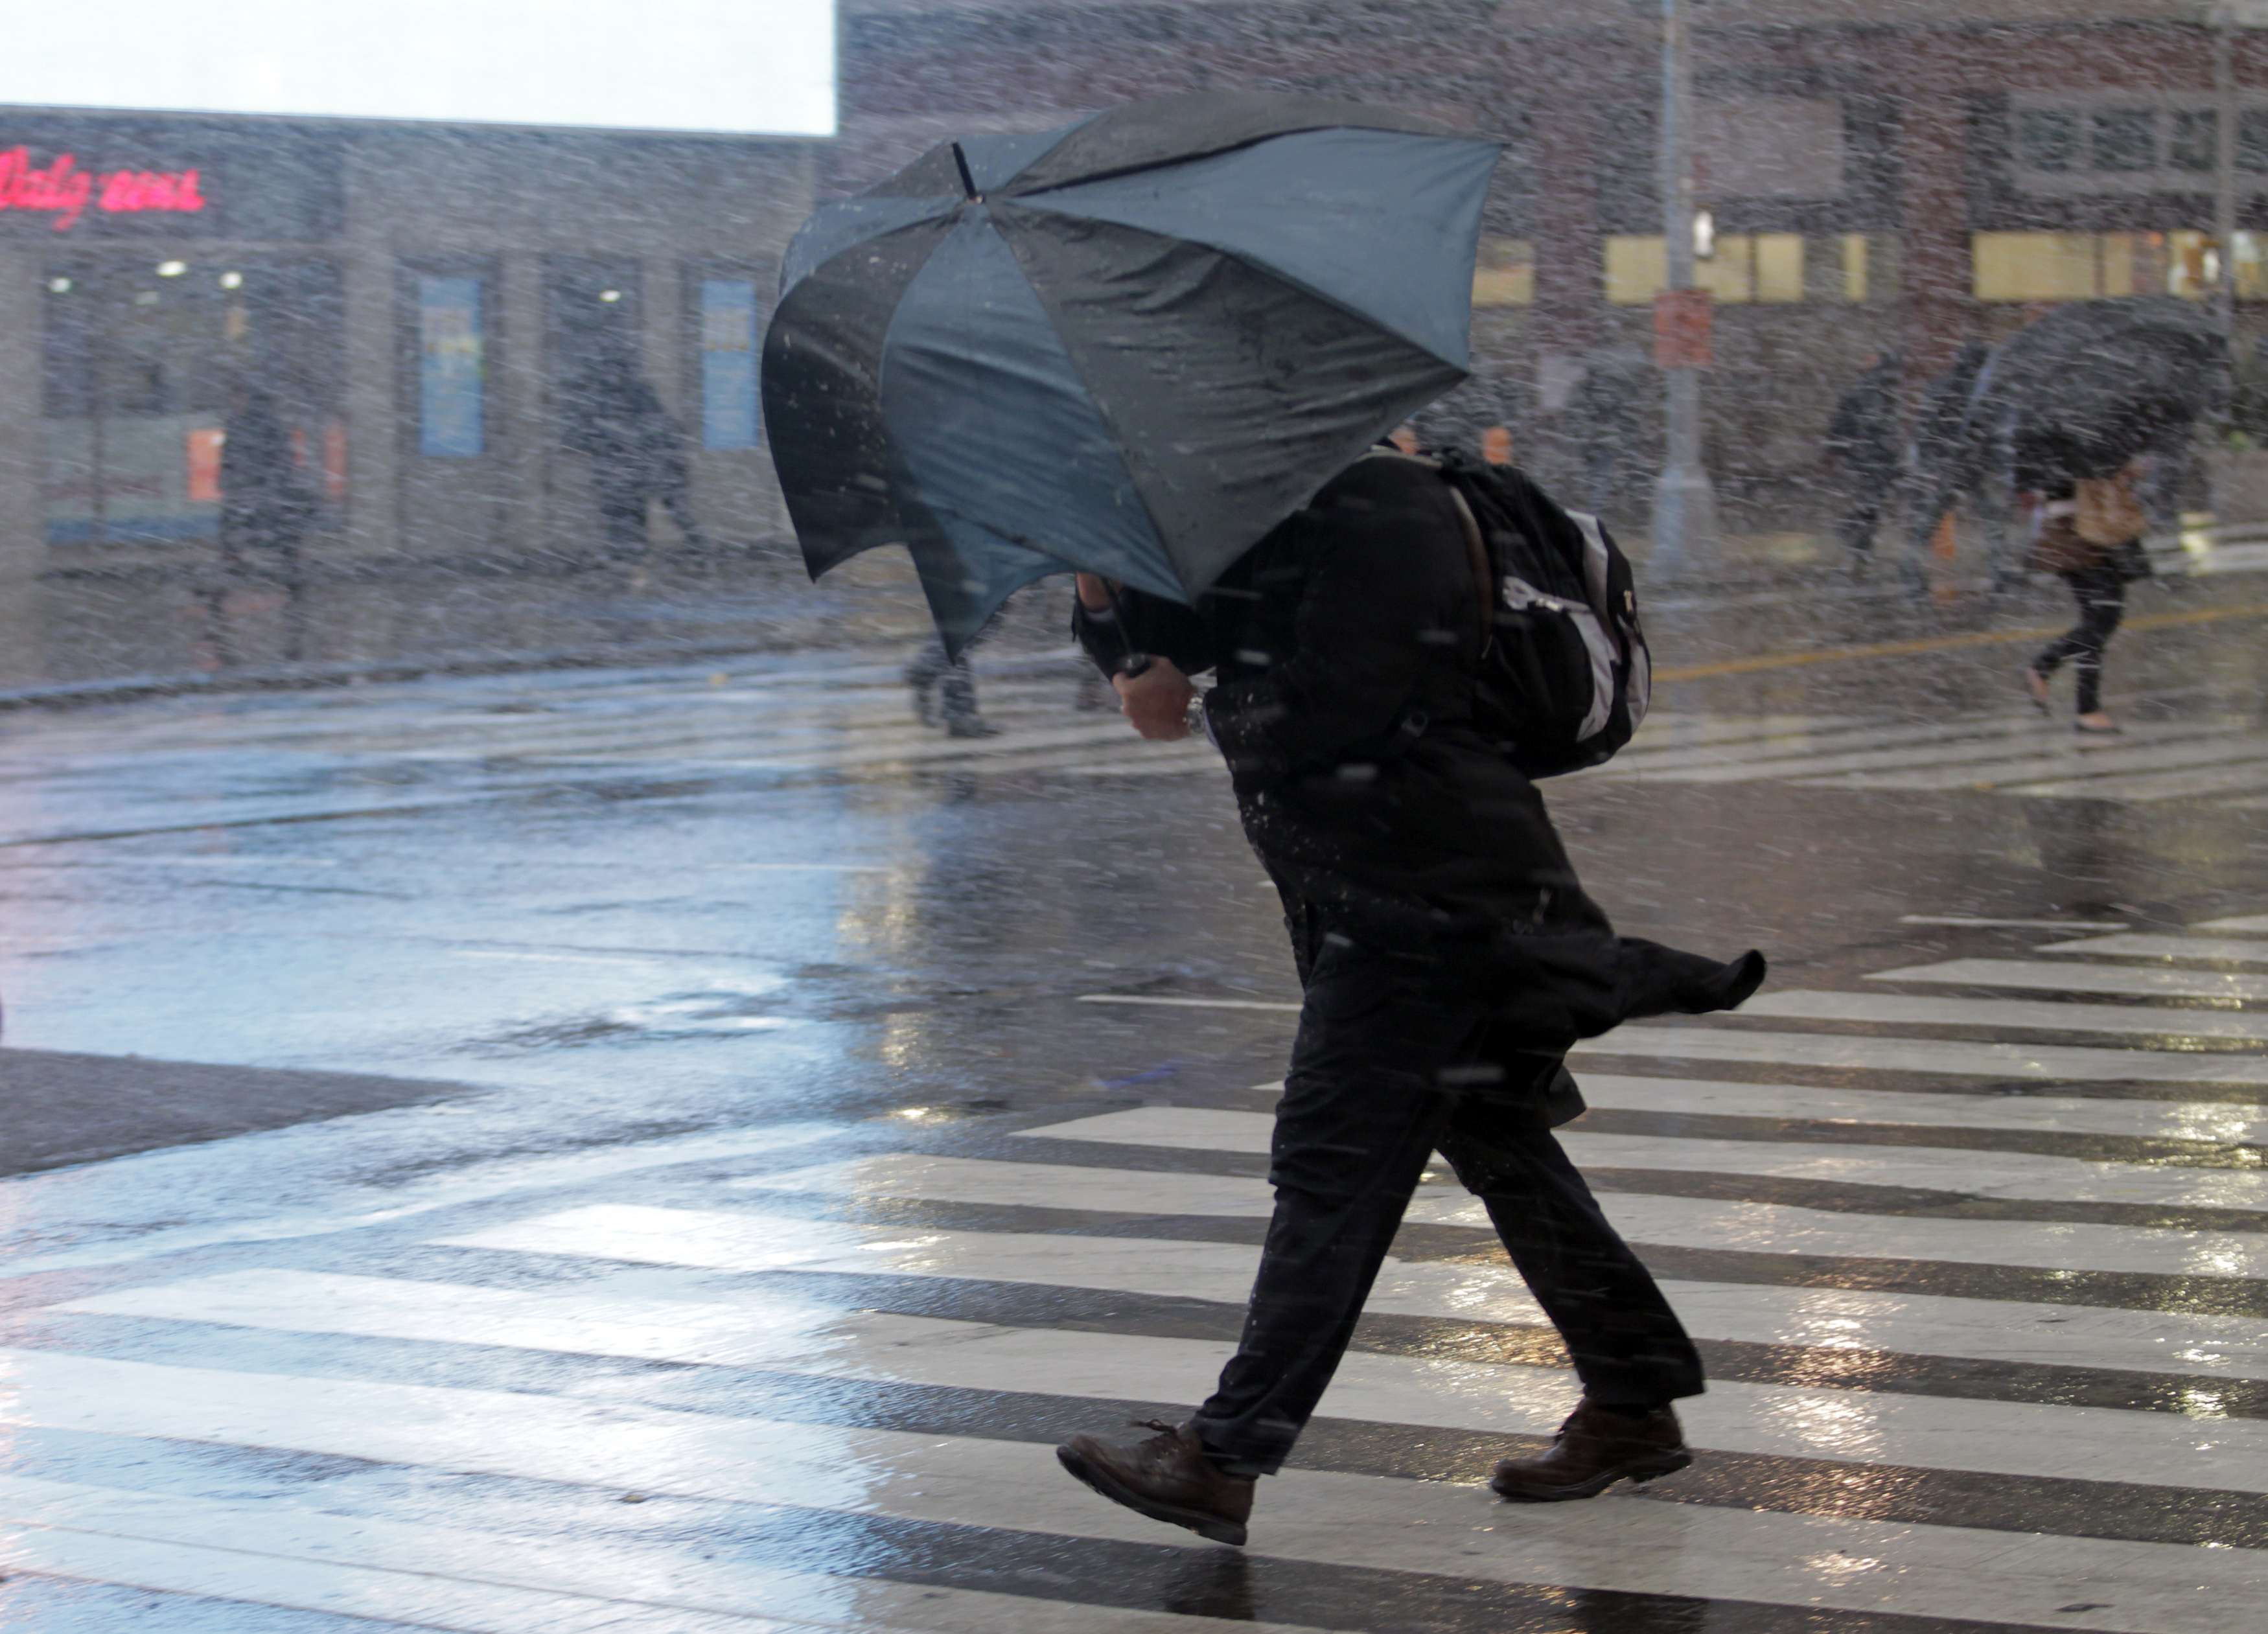 A man struggles with his umbrella in the wind and snow while crossing the street in New York